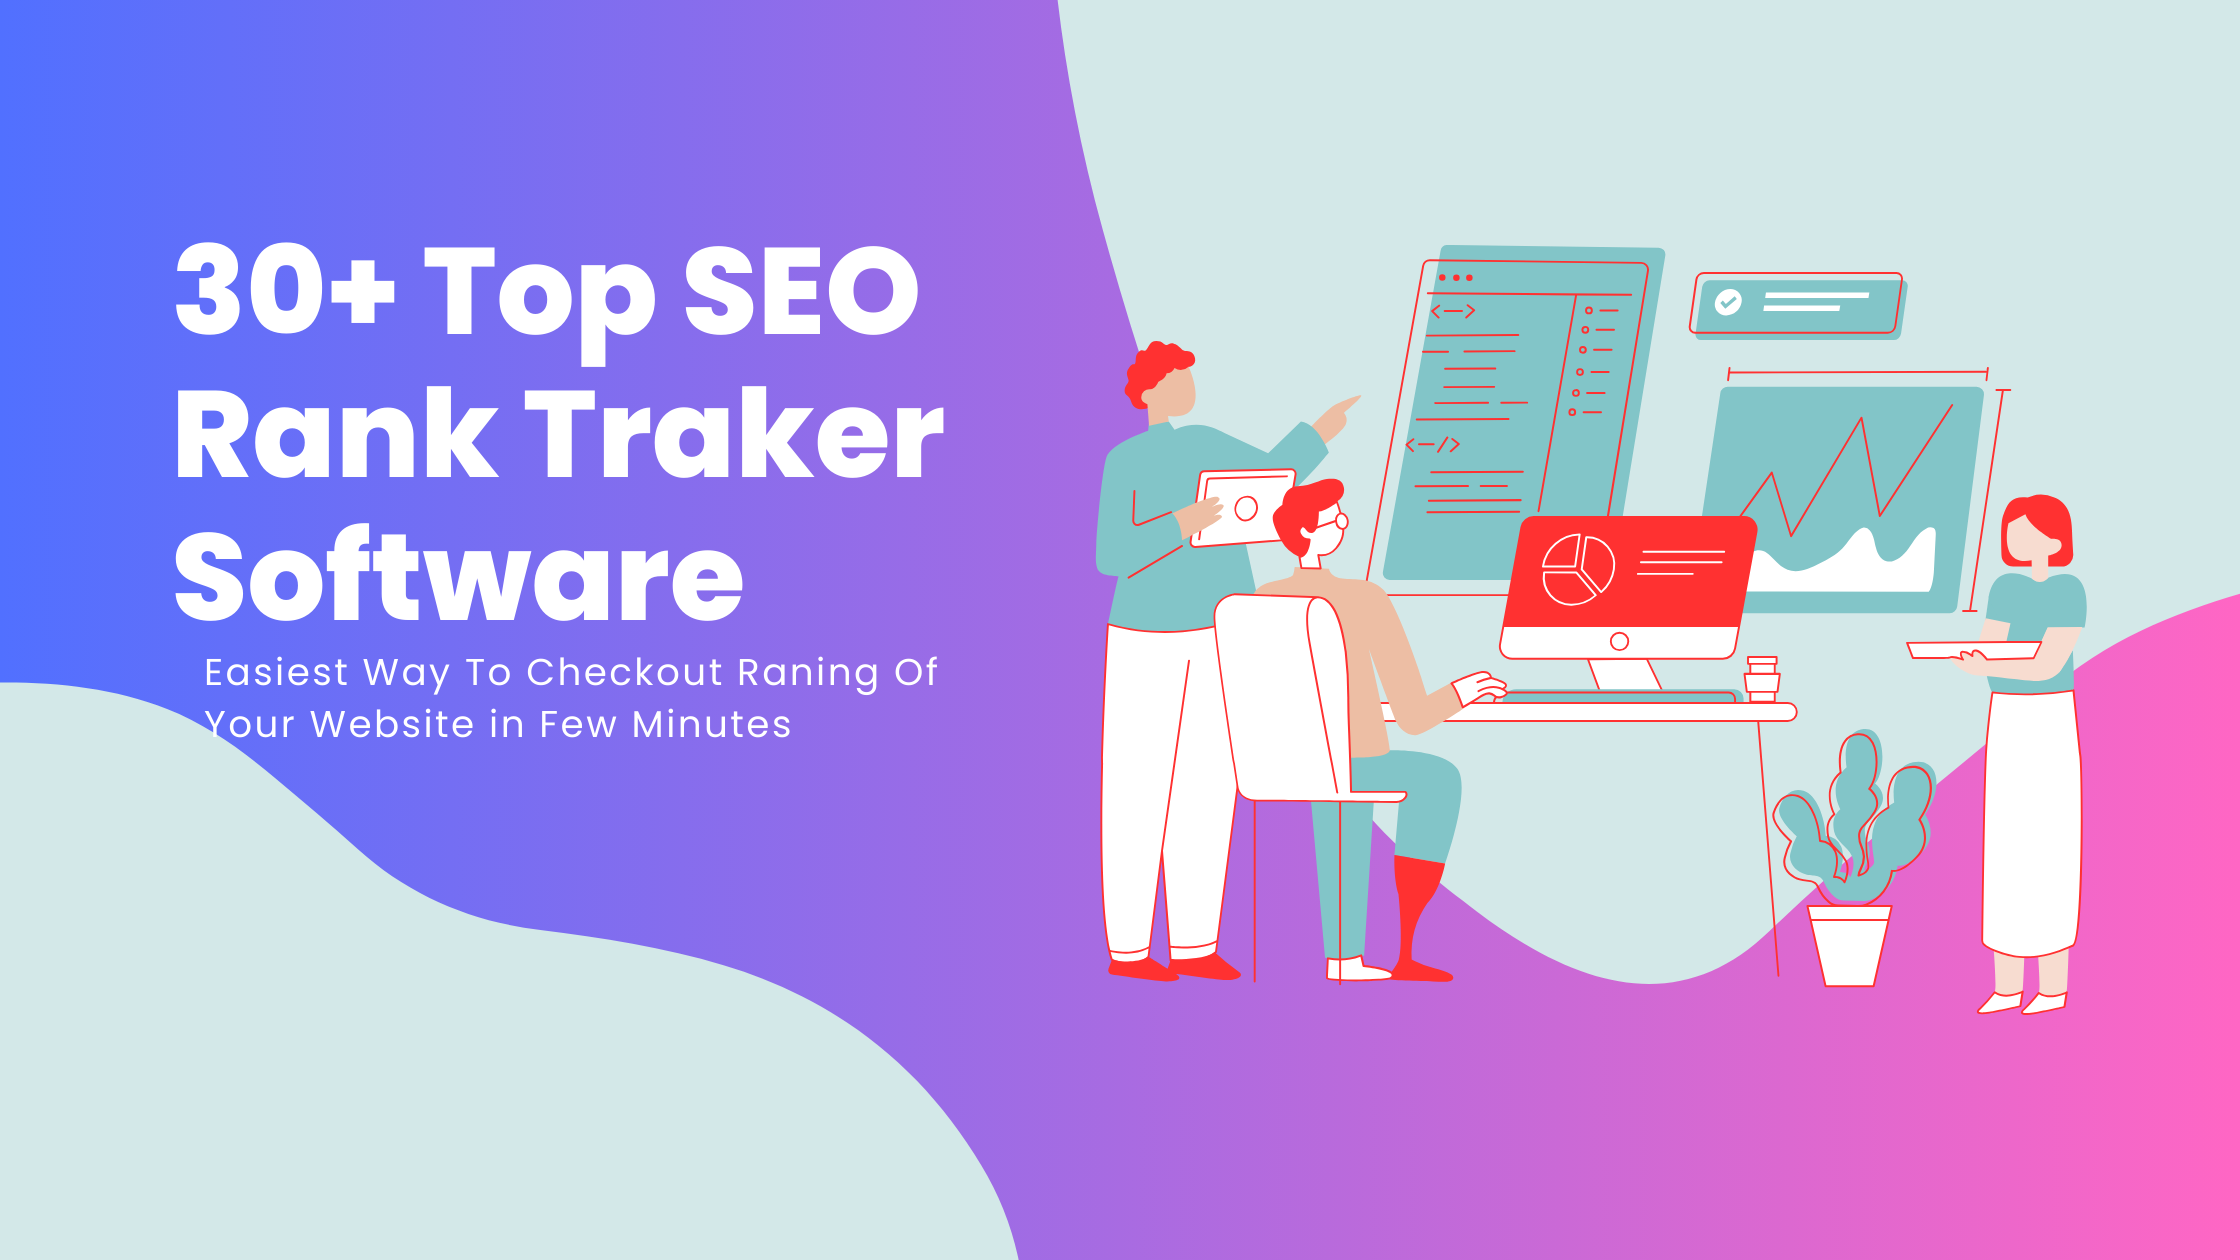 10+ Top SEO Rank Tracker Software and the Easiest Ways to Check Your Web Page Rankings